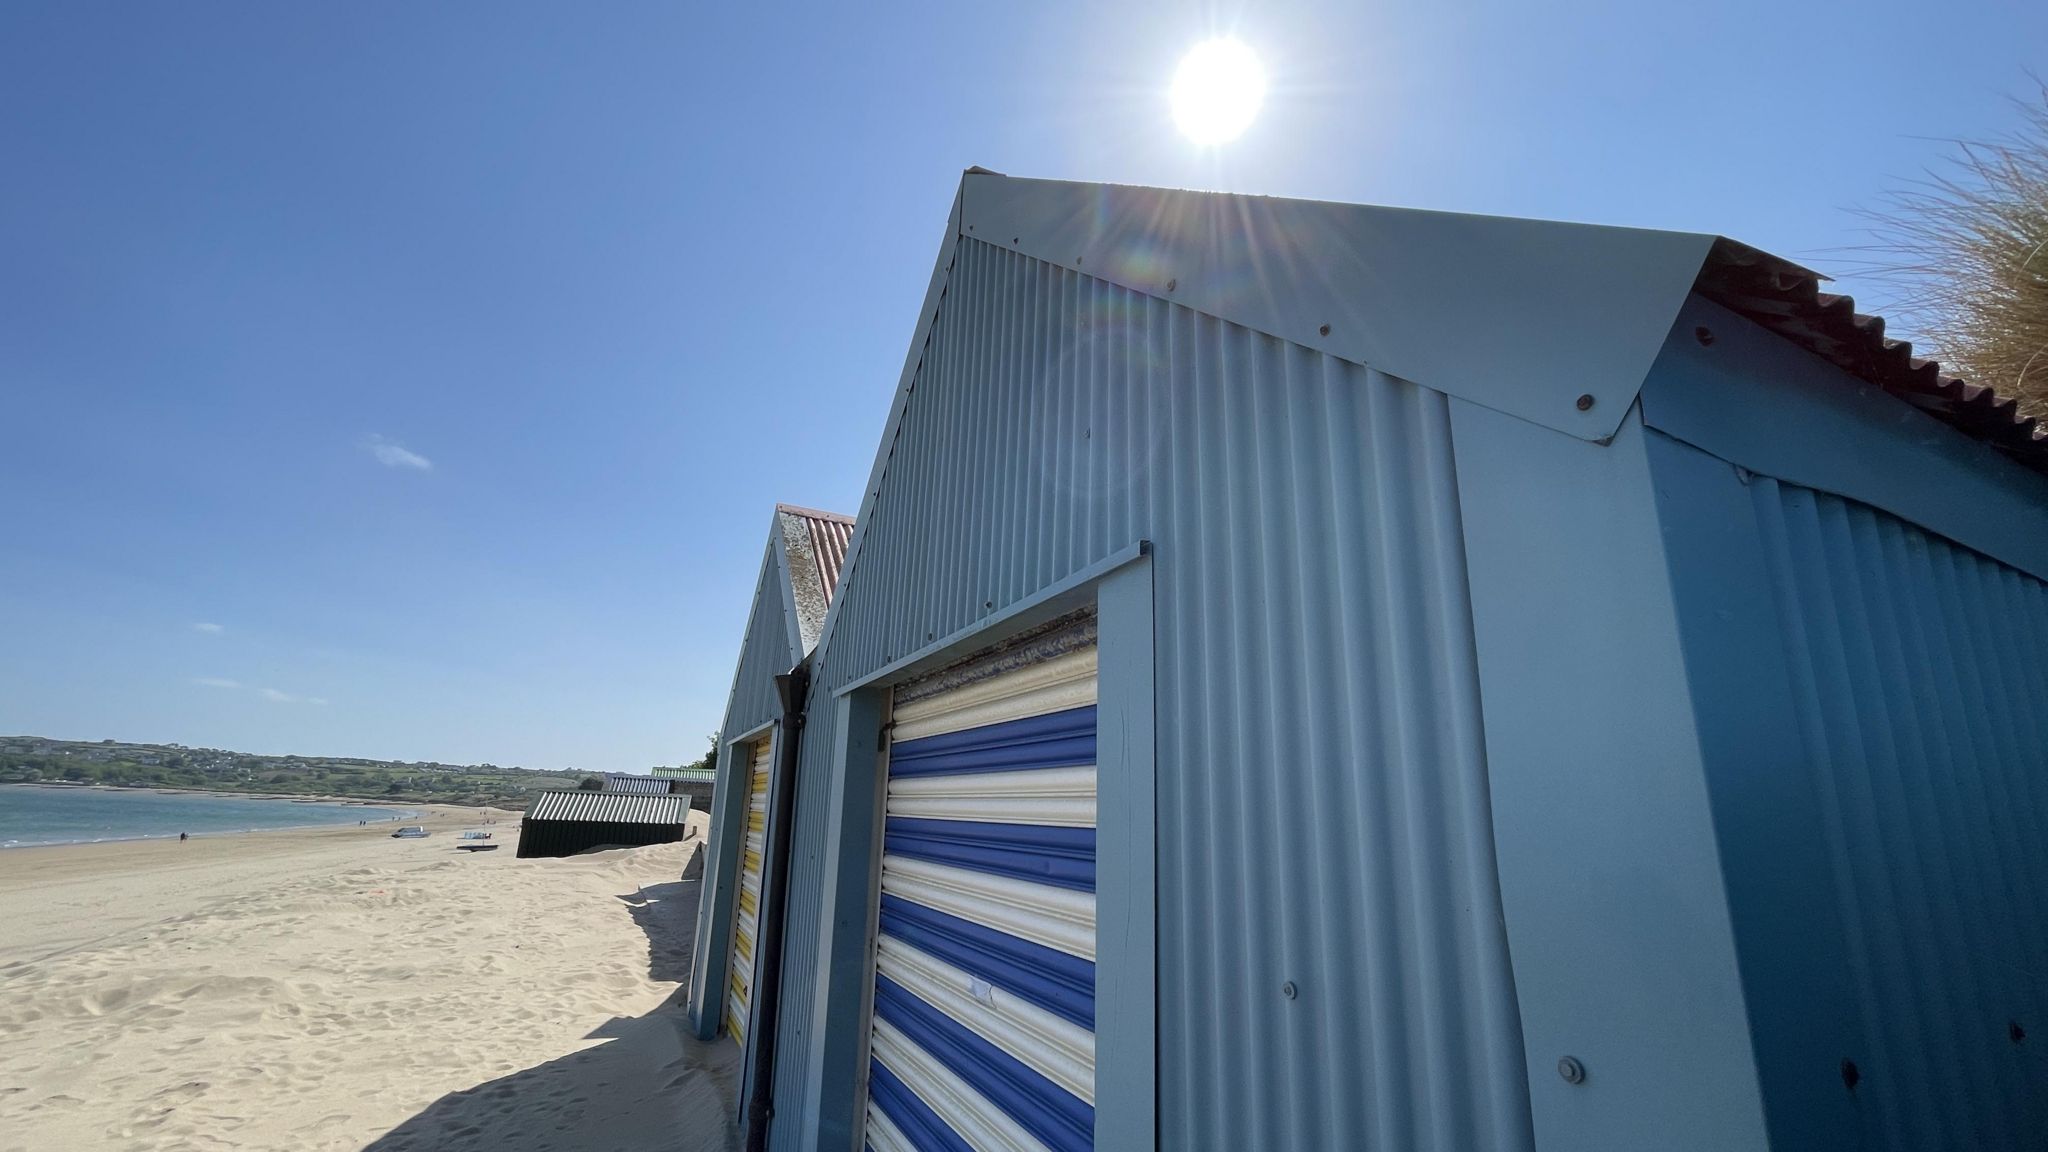 Abersoch beach hut up for sale for £250,000